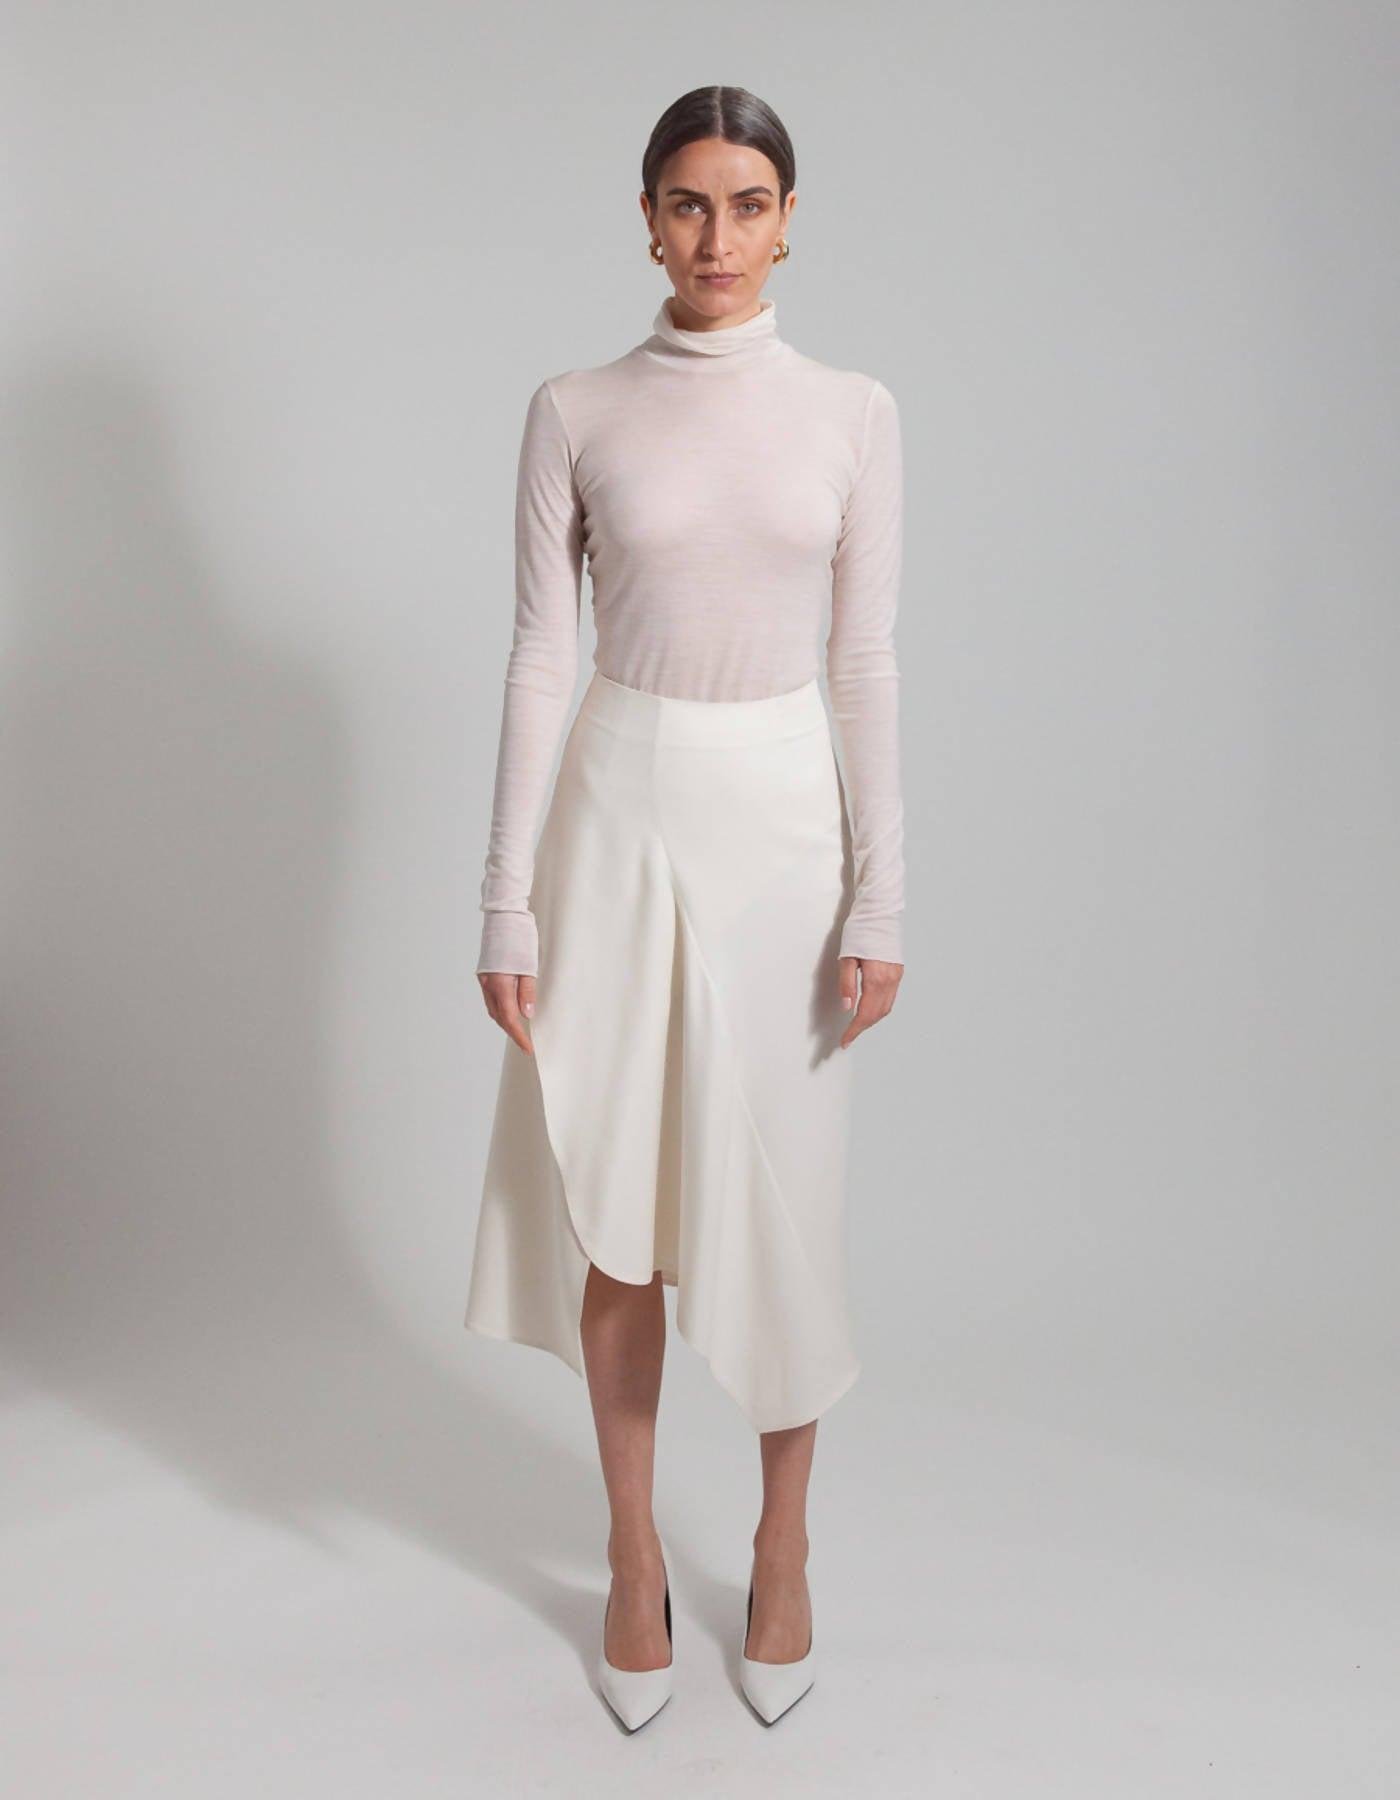 Turtleneck Alexandra by RIGHT DIRECTION